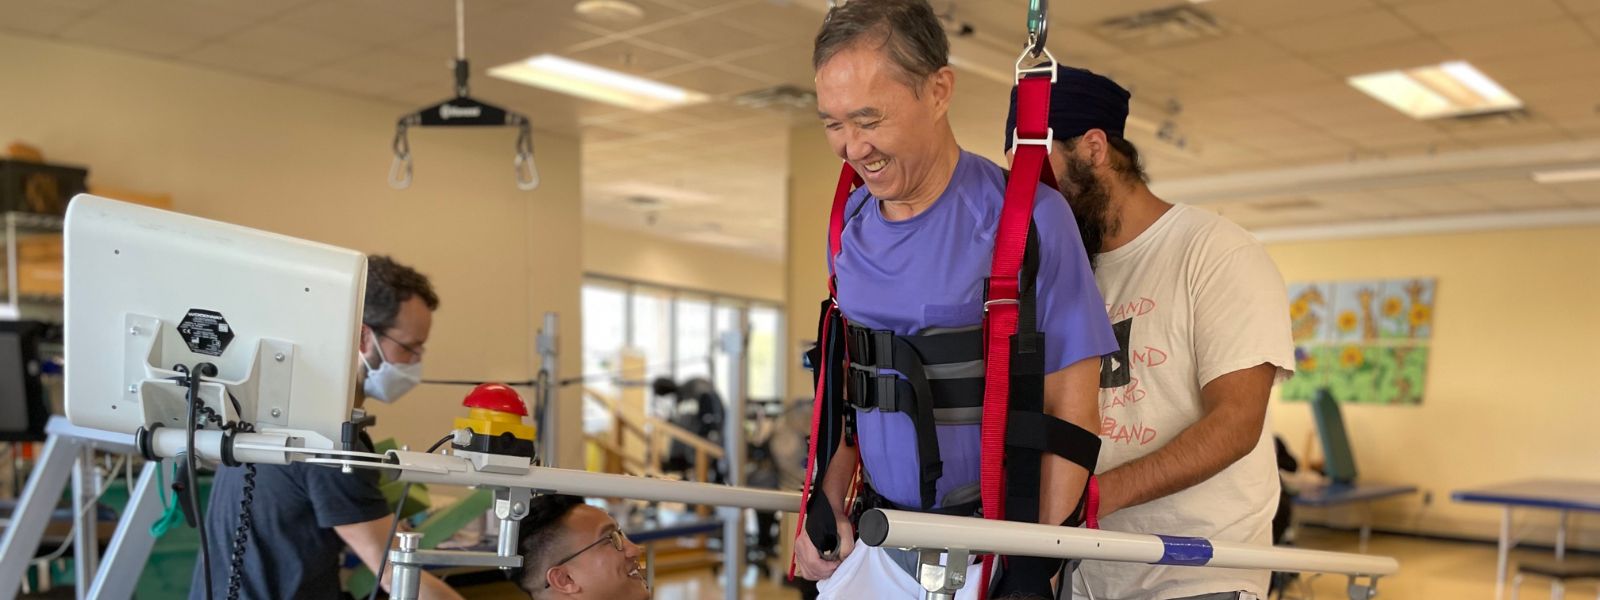 Bobby Kwak, a patient at Shepherd Center, uses a robotic rehabilitation device with the help of his physical therapists to increase muscle strength and range of motion in his legs after sustaining a spinal cord injury.